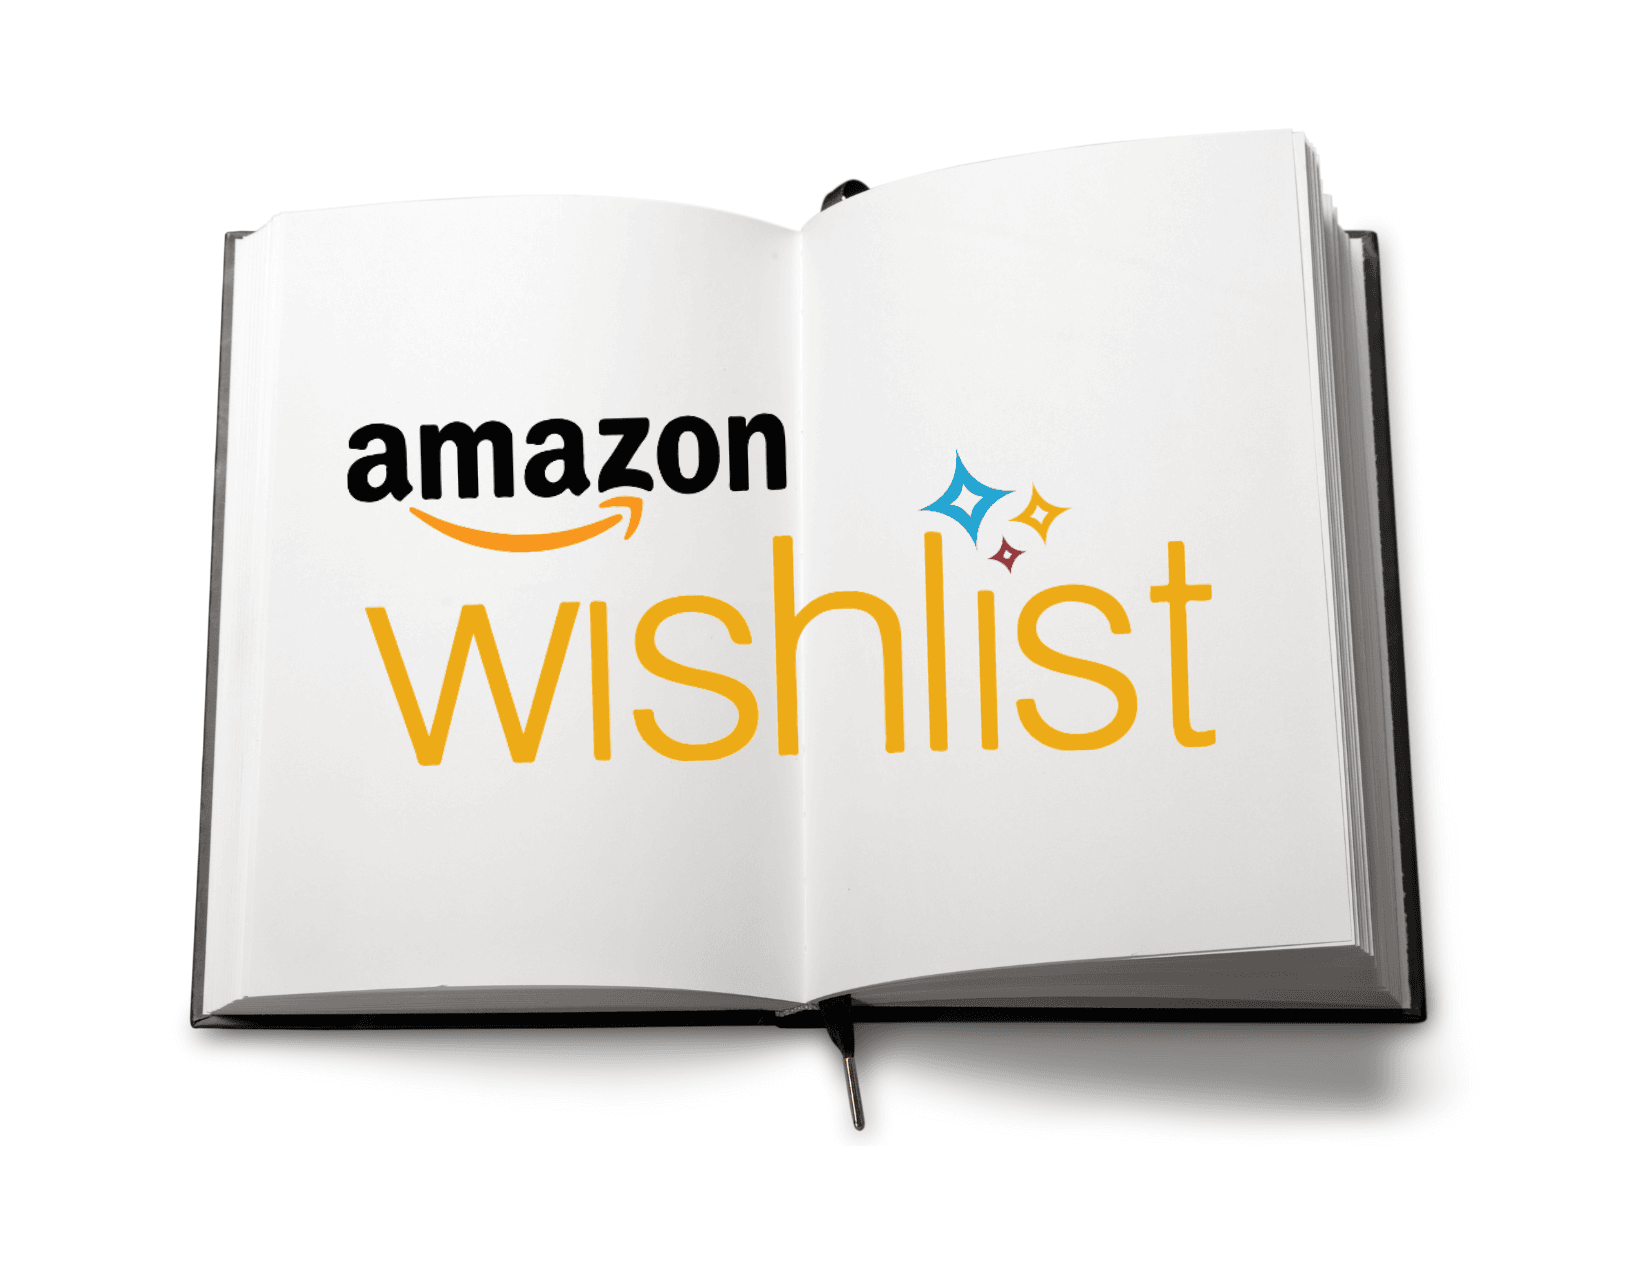 Use our Amazon Wishlist to Purchase Books for Students